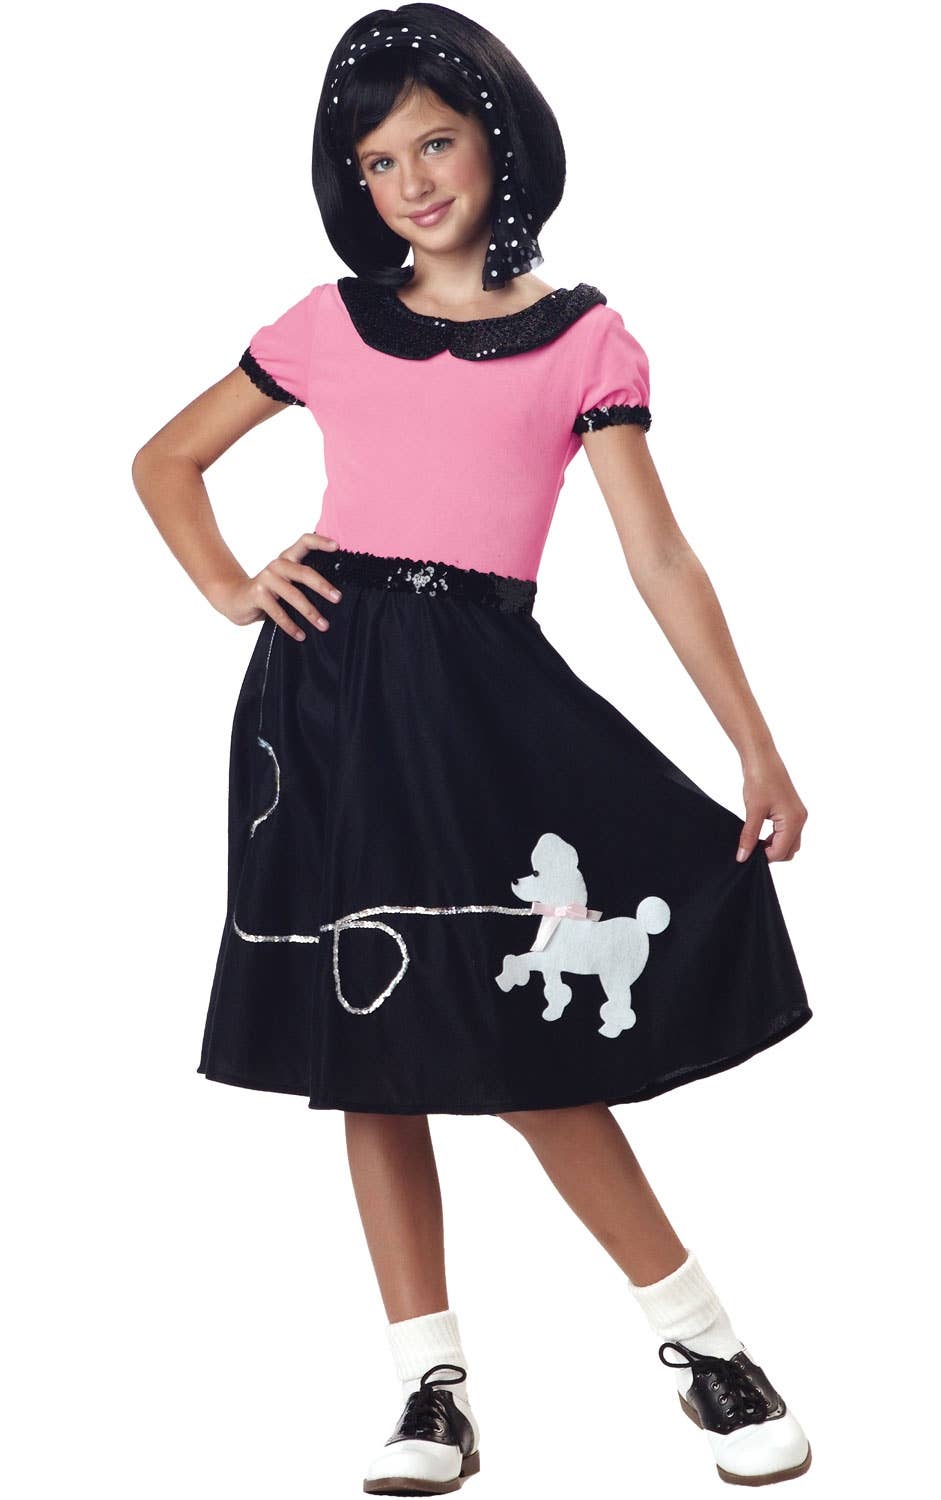 50's Hop Girls Costume With Poodle Skirt Image 1 